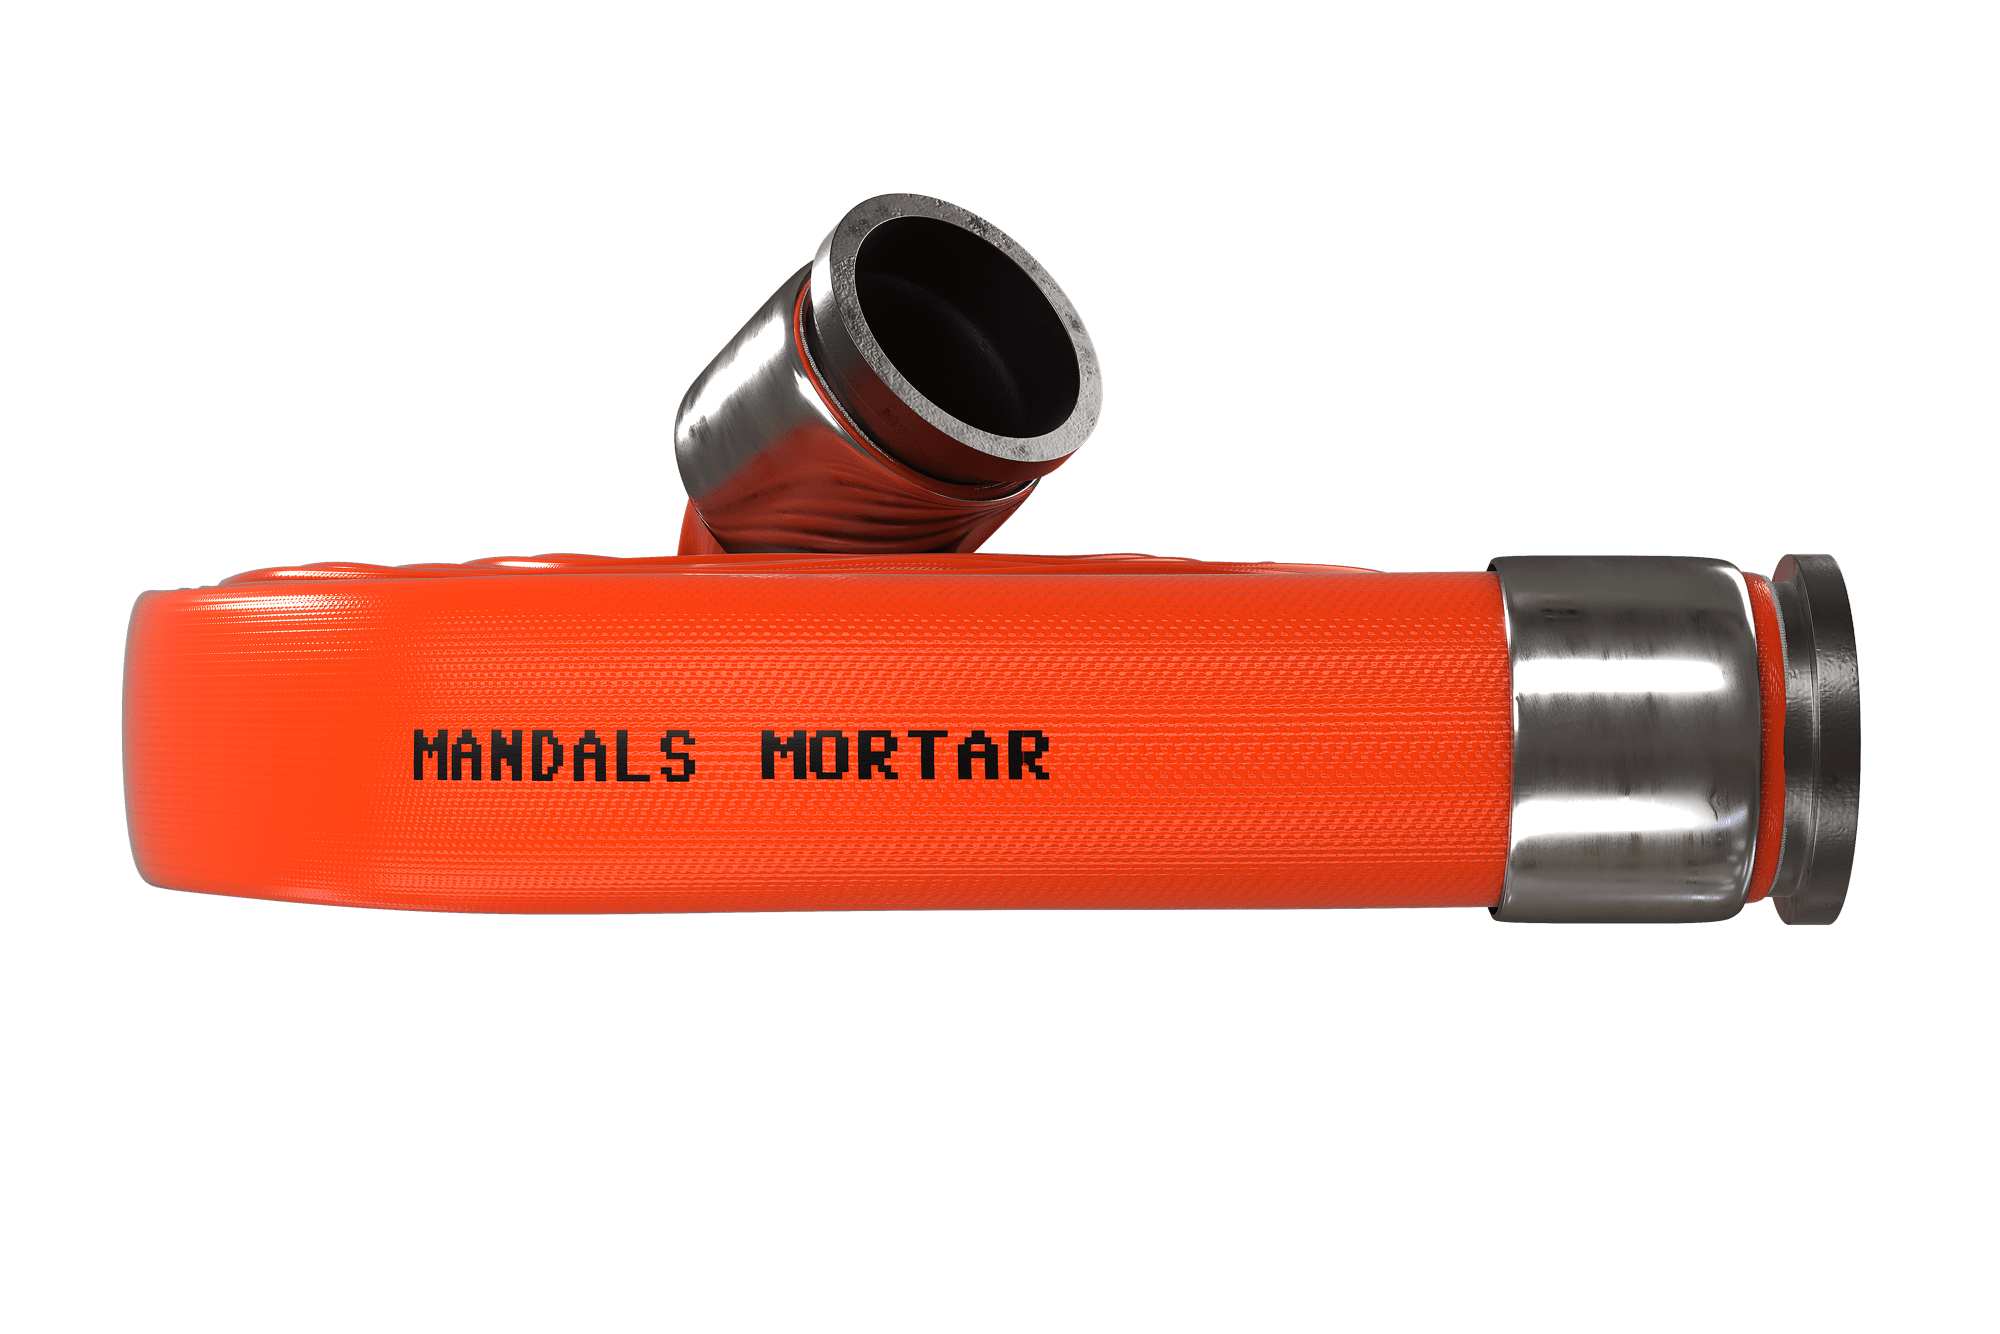 Mortar featured image